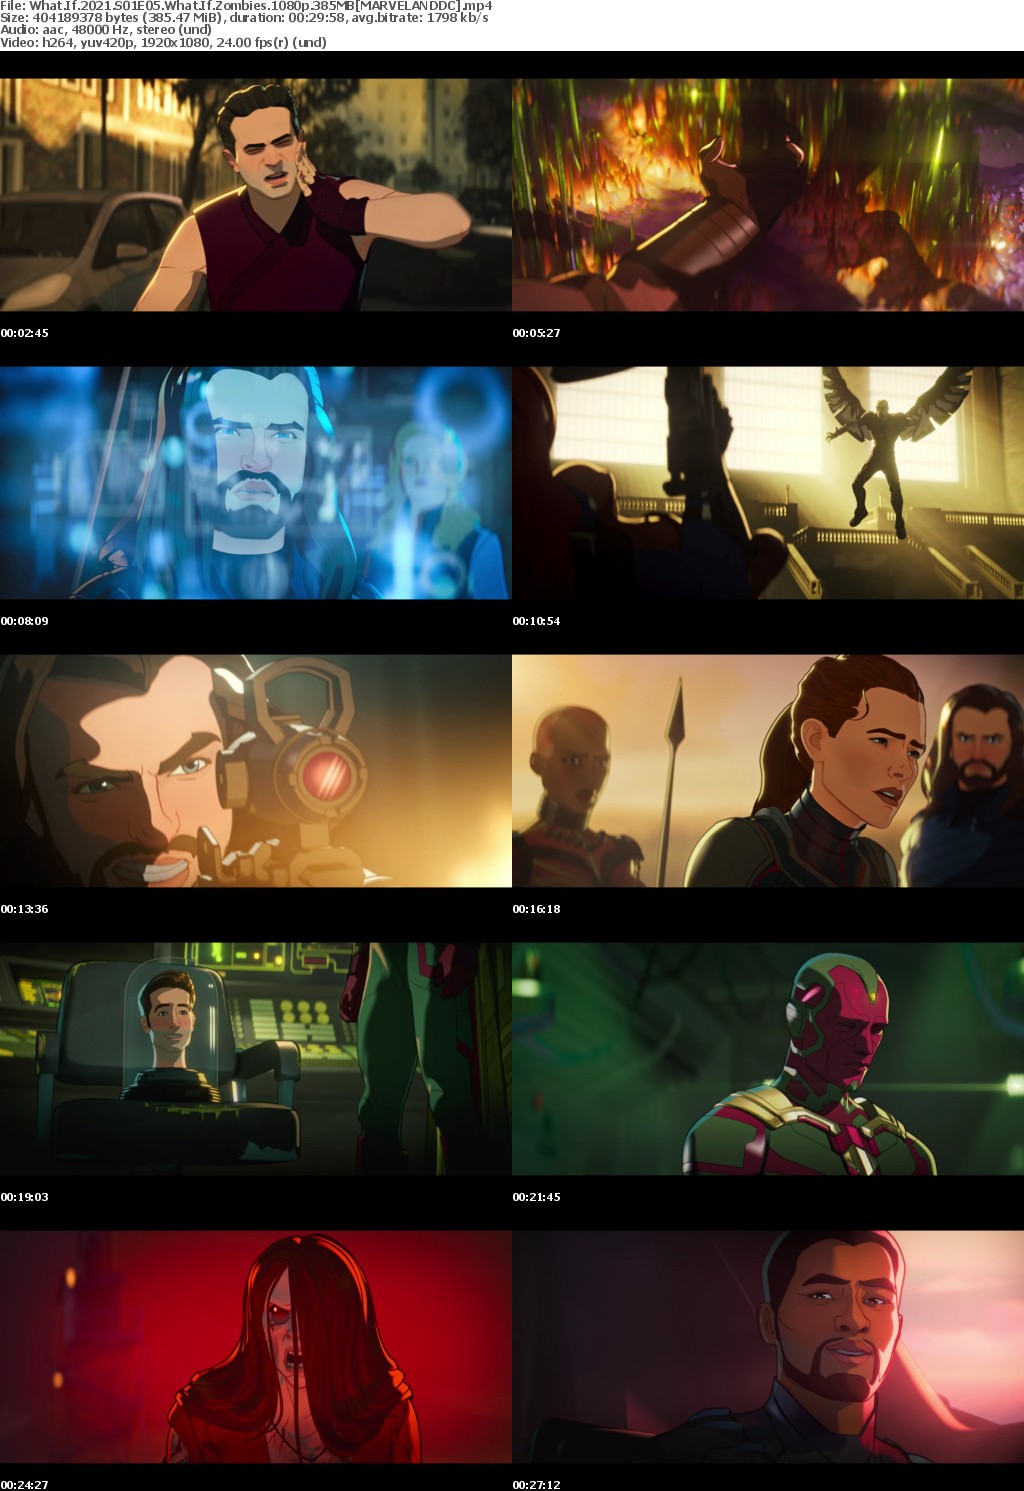 What If 2021 S01E05 What If Zombies 1080p 385MB MARVELANDDC